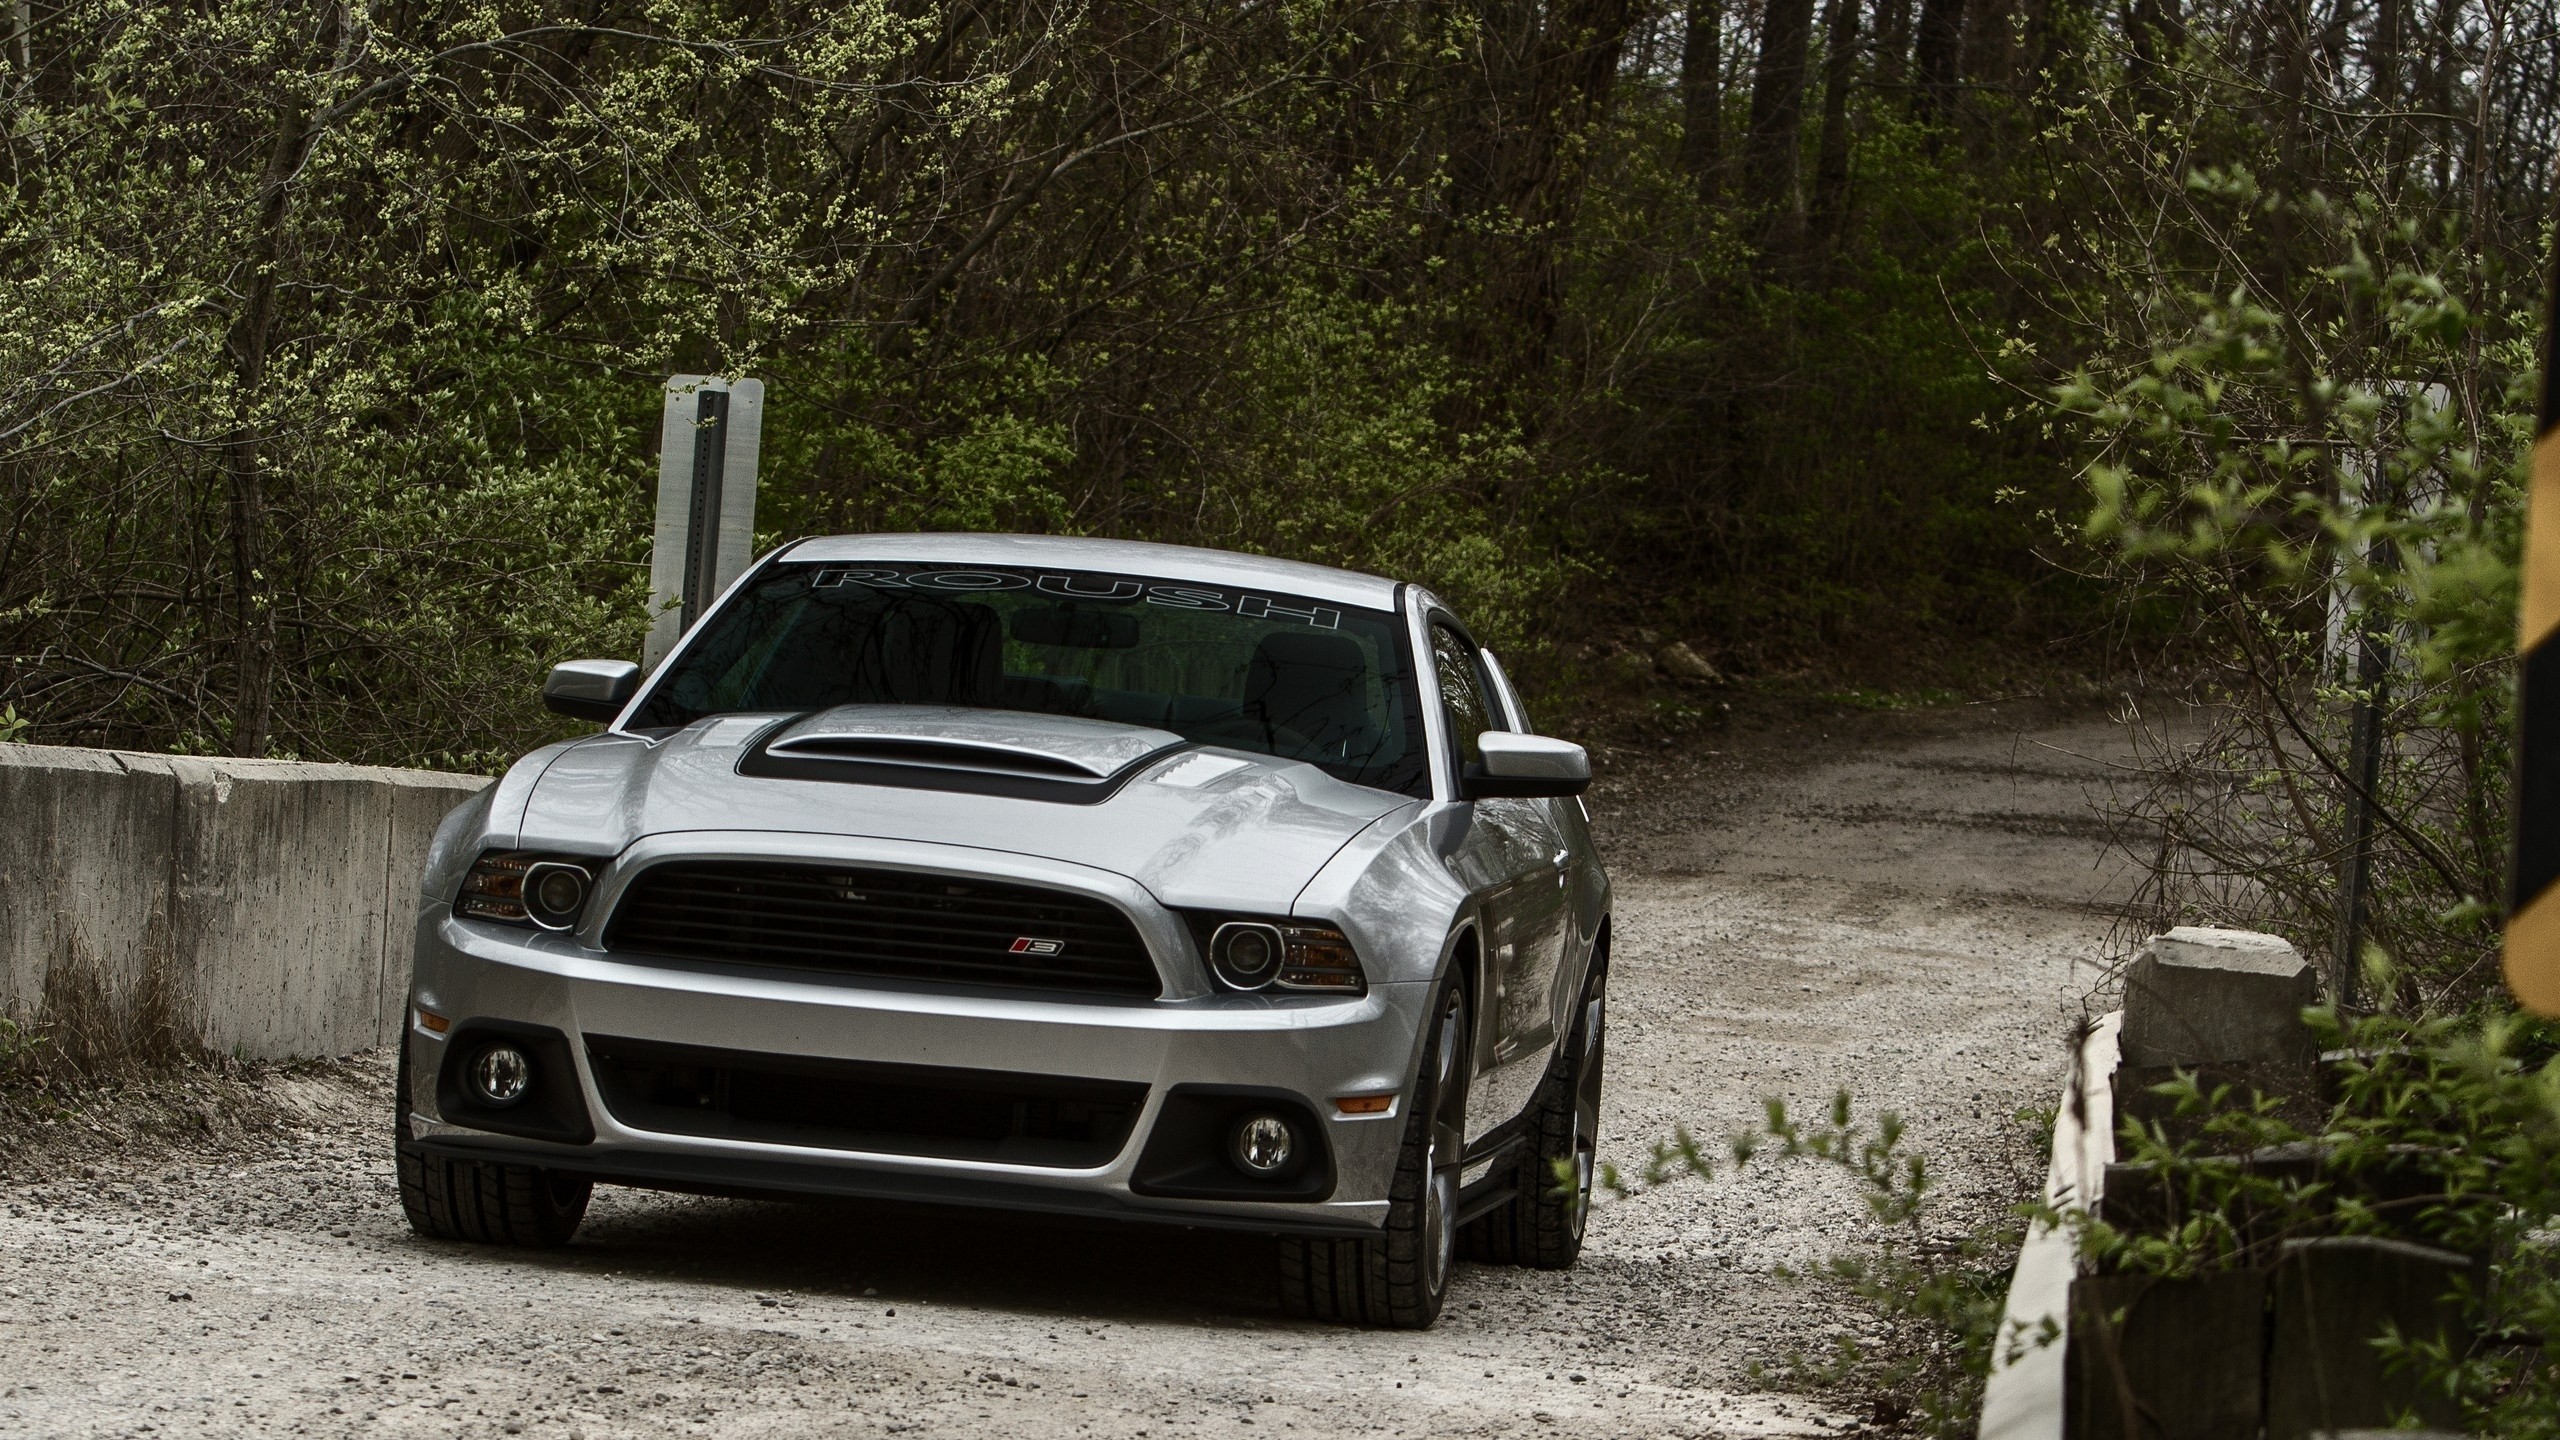 2560x1440 Pictures Of The New Mustang Background For Desktop Pc